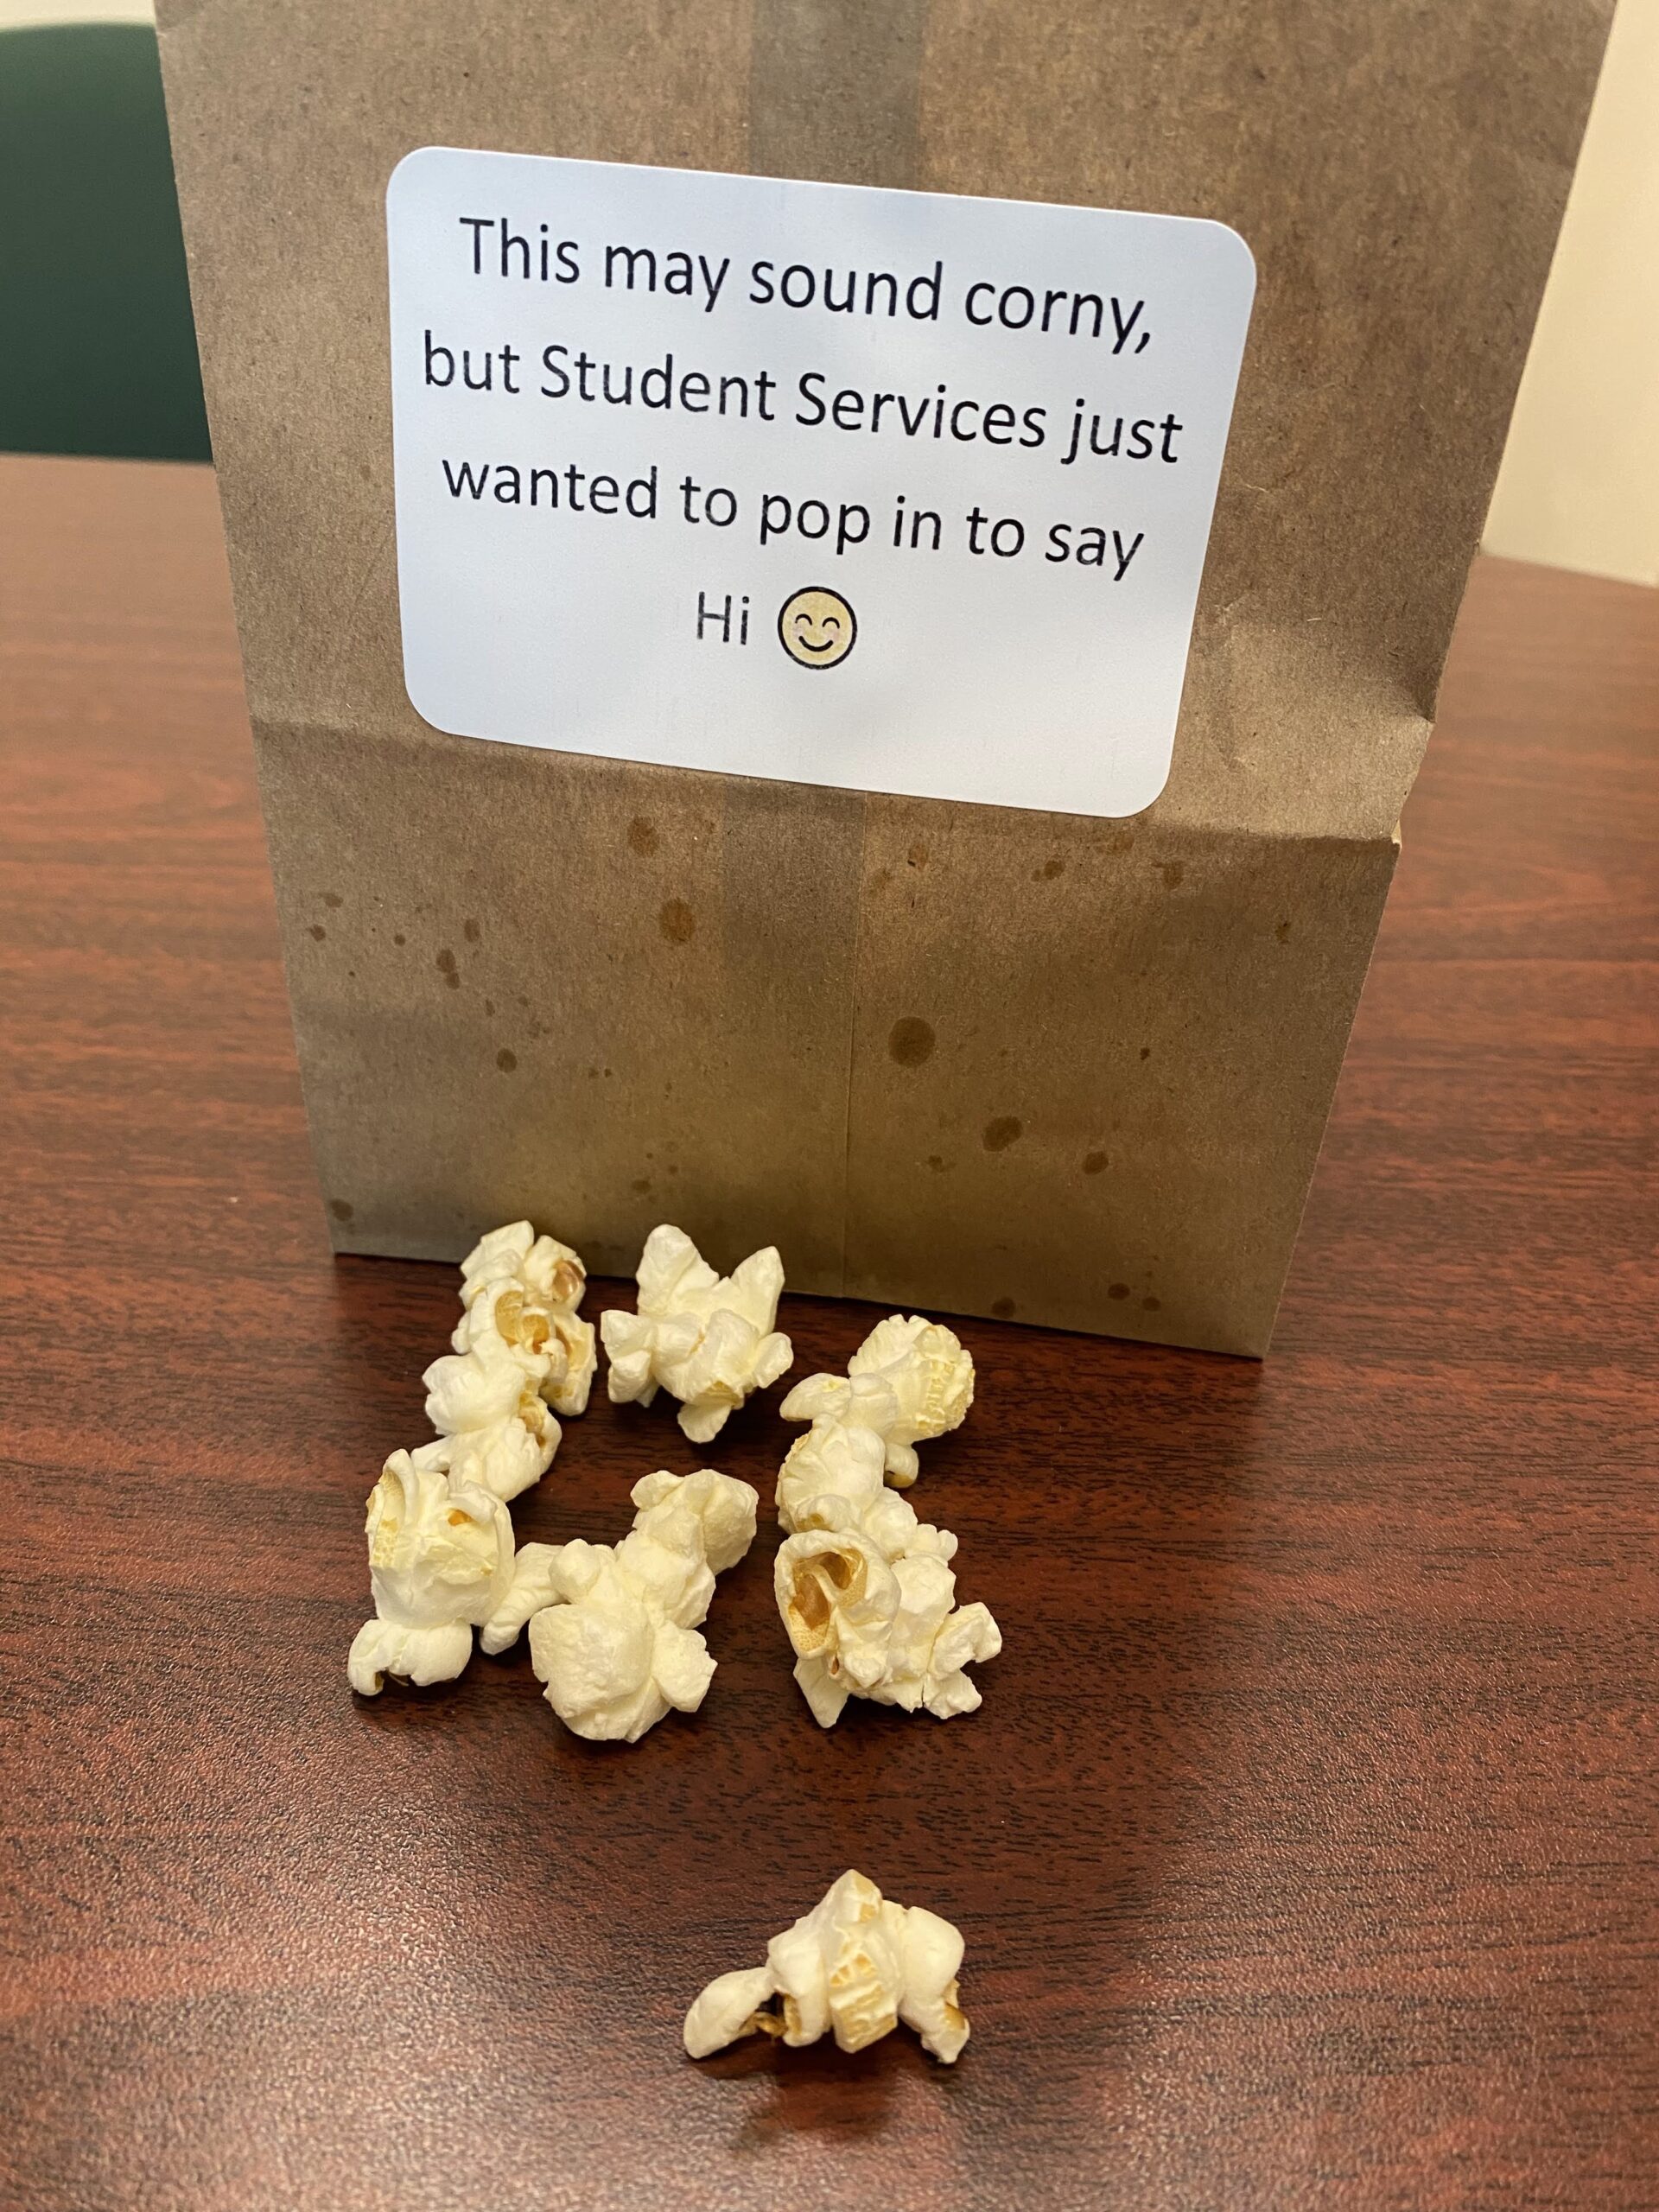 Bag of popcorn with a stick on saying "This may sound corny by Student Services just wanted to pop in to say Hi :)"